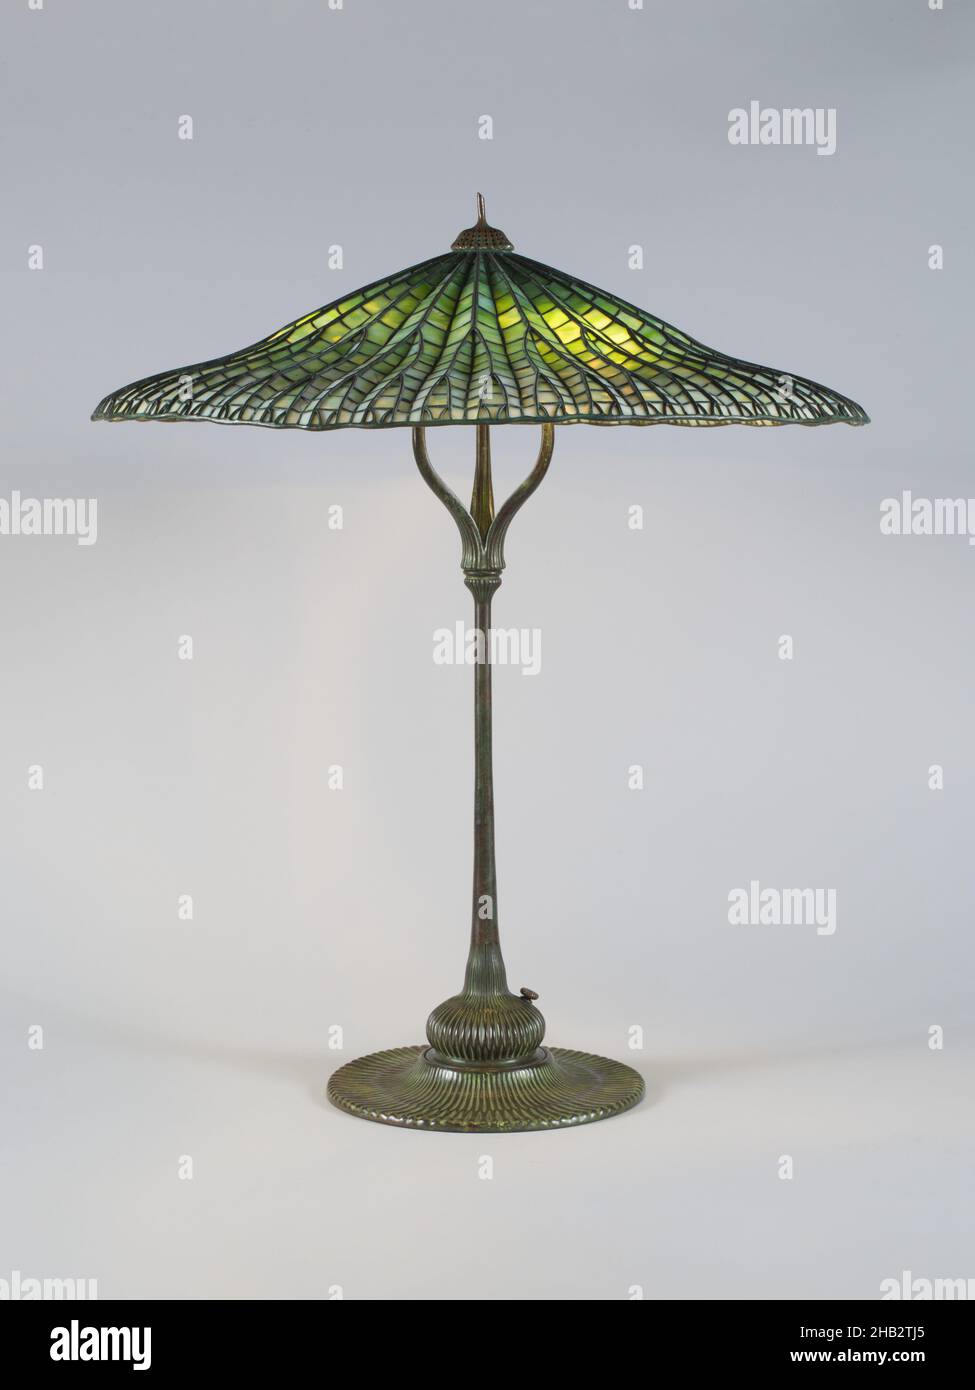 Lotus, Pagoda Lamp, Louis Comfort Tiffany, American, 1848–1933, Tiffany Studios, Corona, New York, 1900–1938, c.1900–1905, Bronze and leaded Favrile glass, Made in Corona, New York, United States, North and Central America, Glassware, lighting, 31 1/2  in. x 26 1/8 in. (80 x 66.4 cm Stock Photo